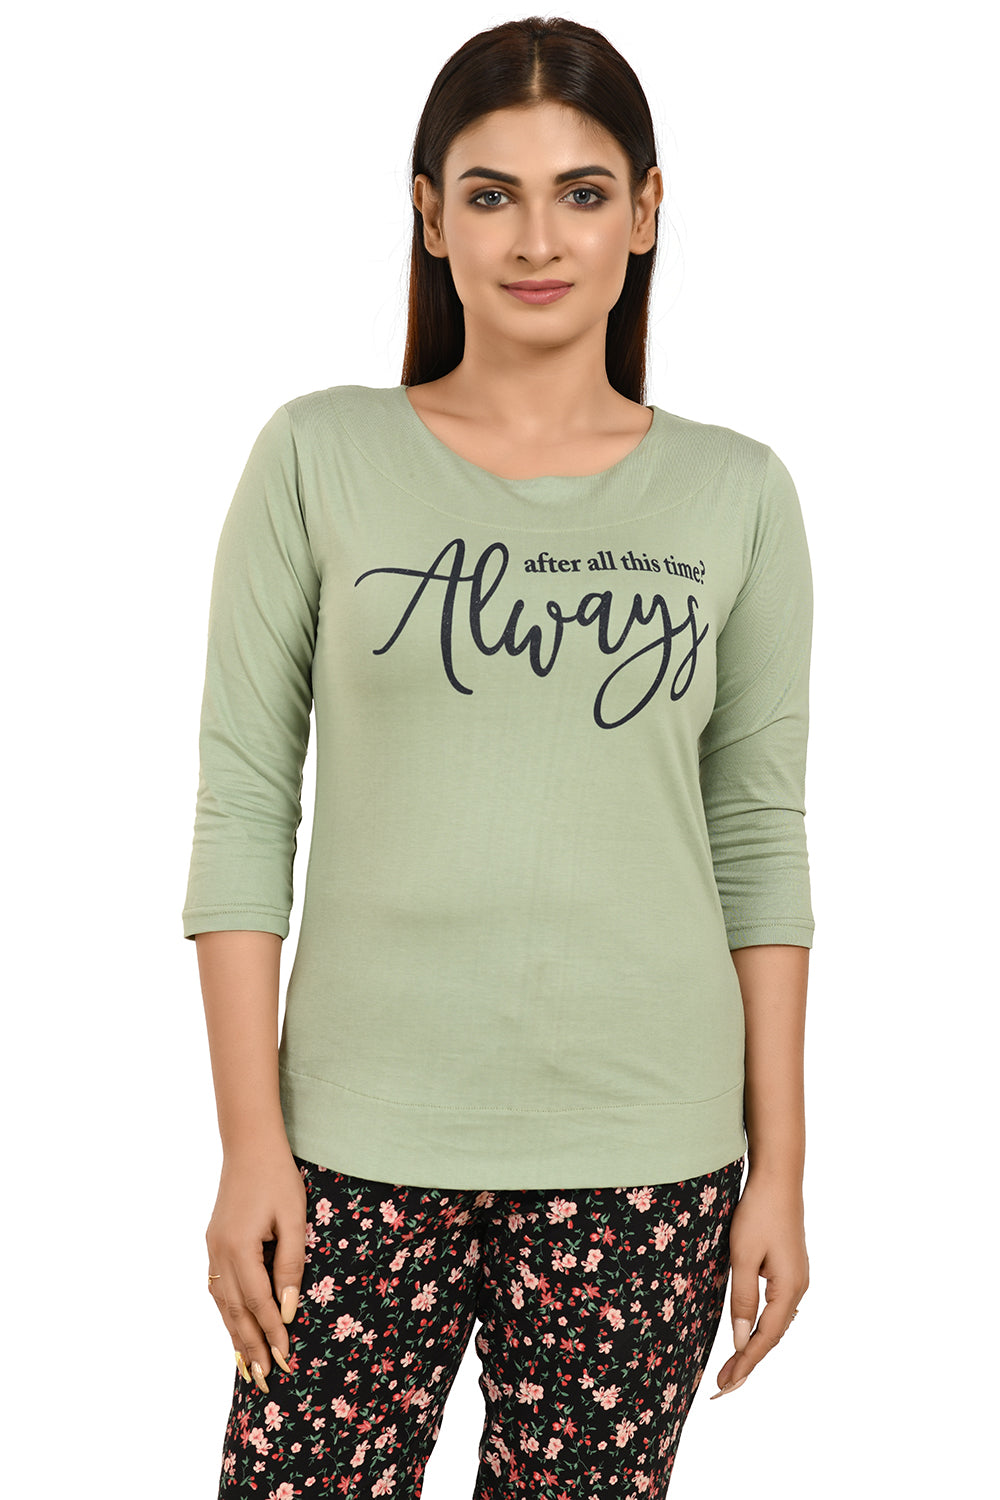 Dusty Green Boat Neck Printed Tees